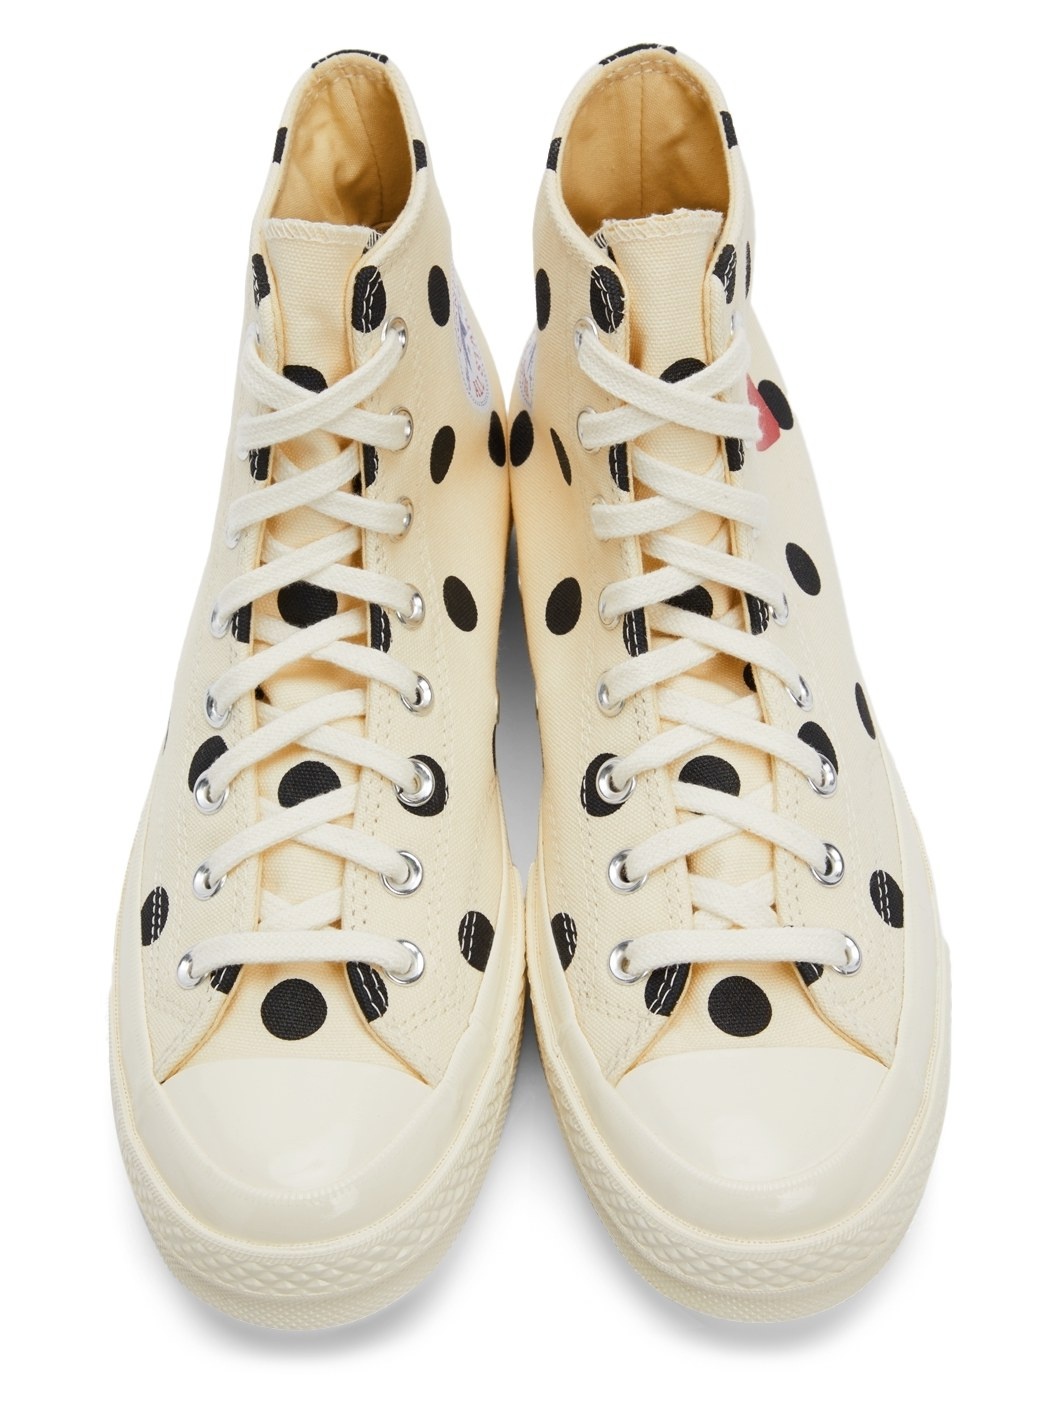 Off-White Converse Edition Polka Dot High Sneakers - 5